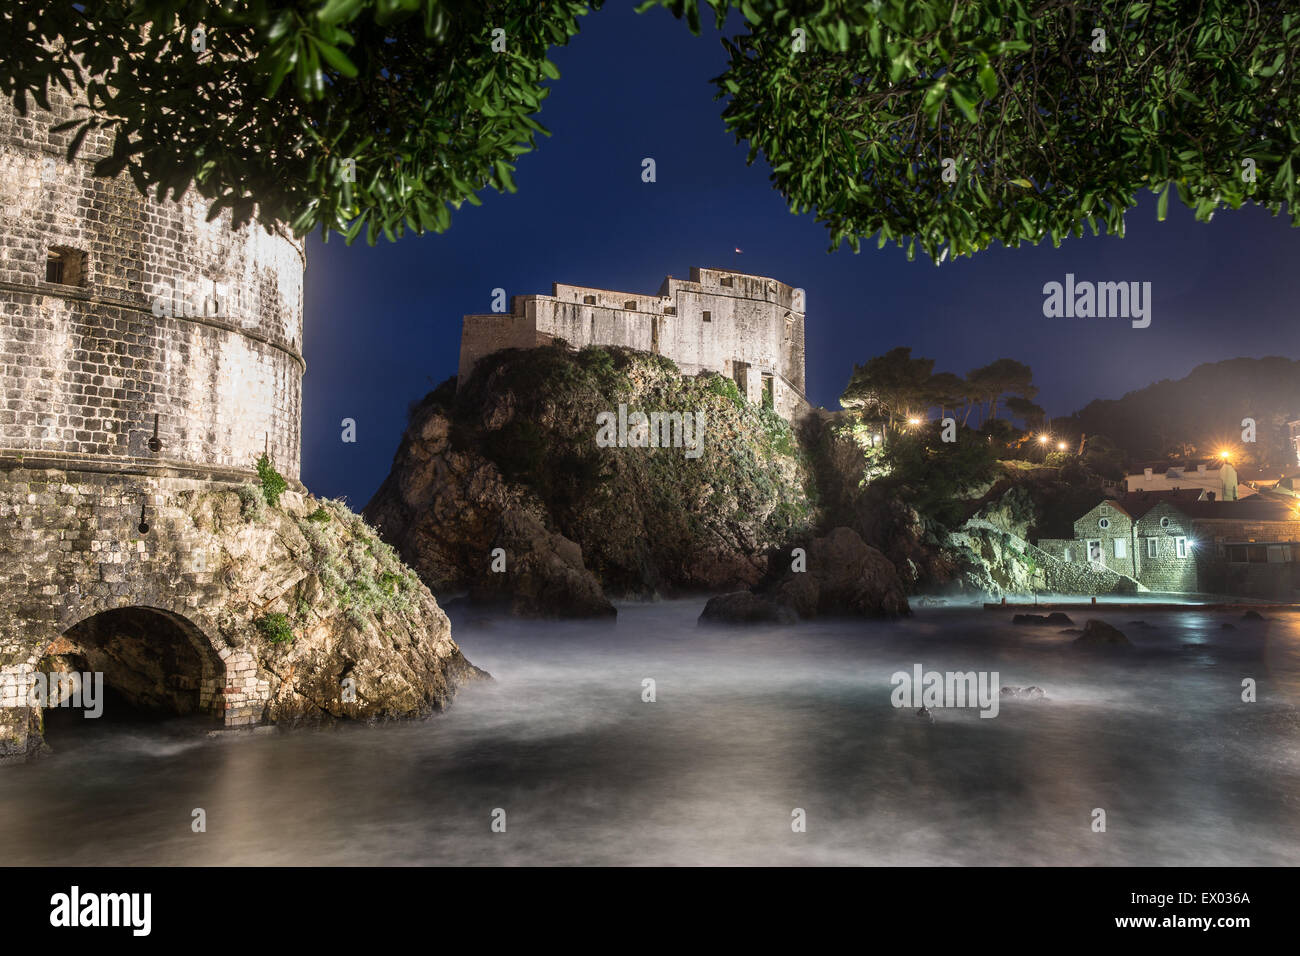 View of old town castle at night, Dubrovnik, Croatia Stock Photo